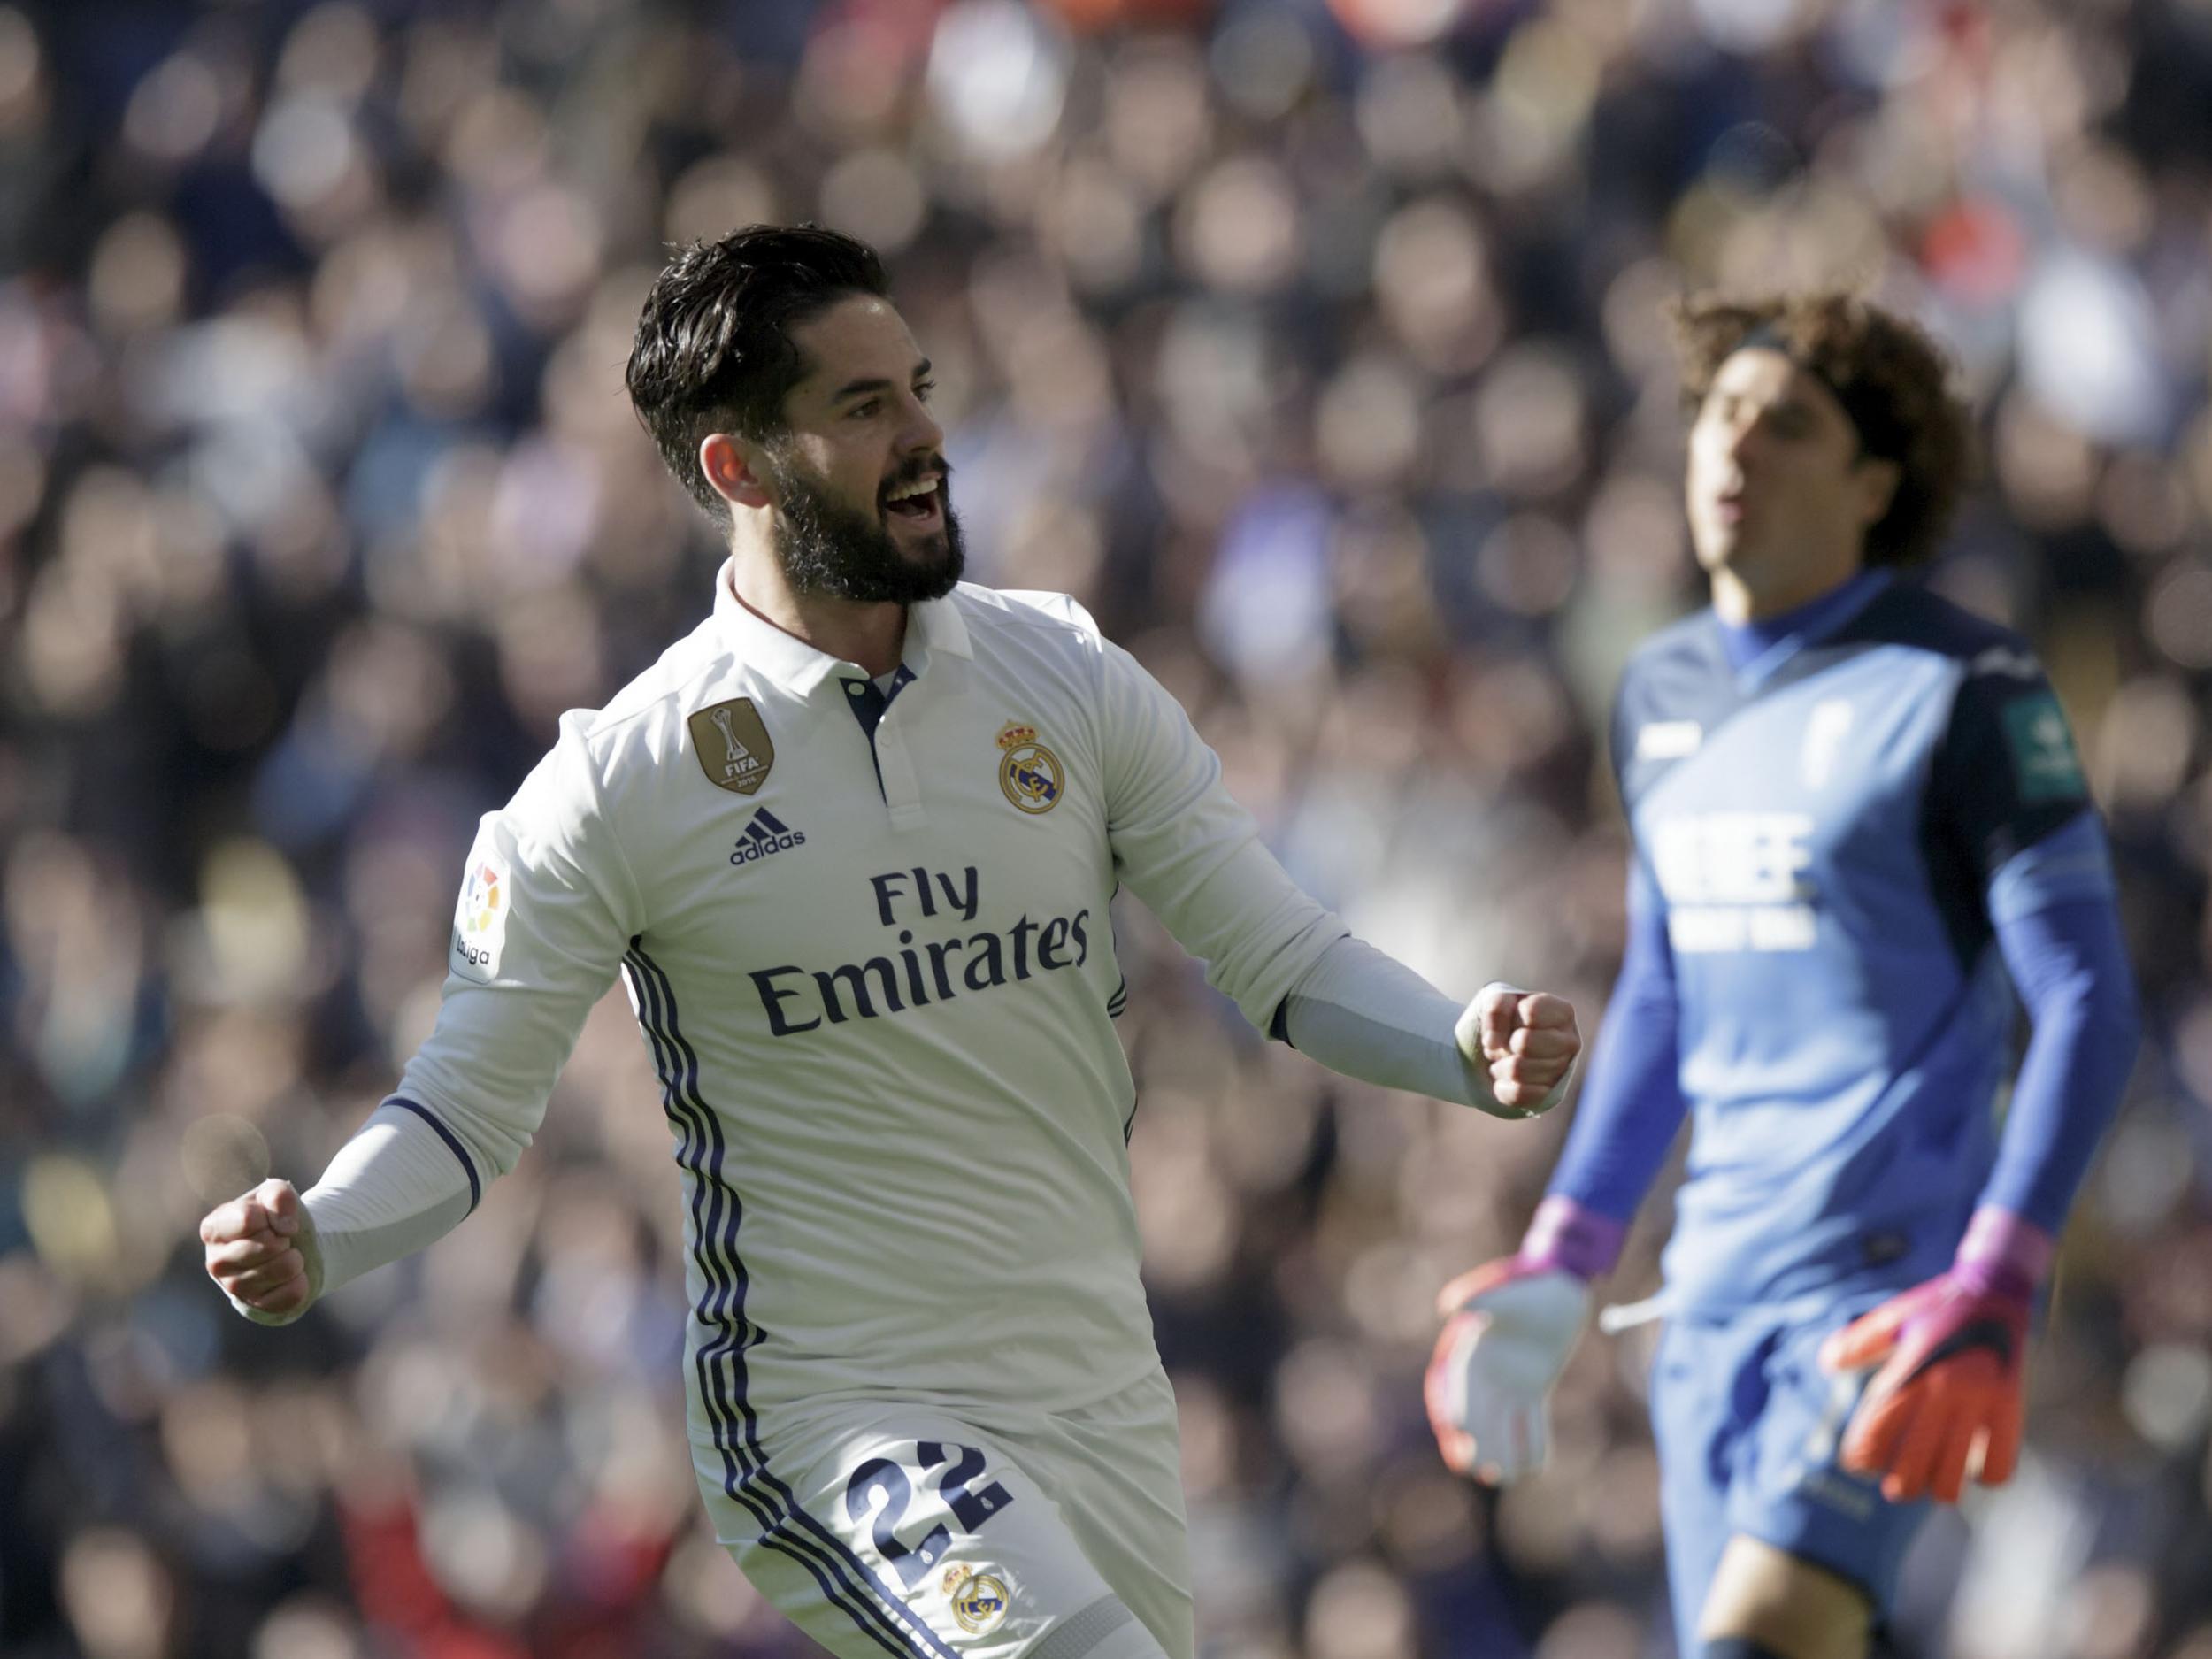 Isco scored twice in the rout